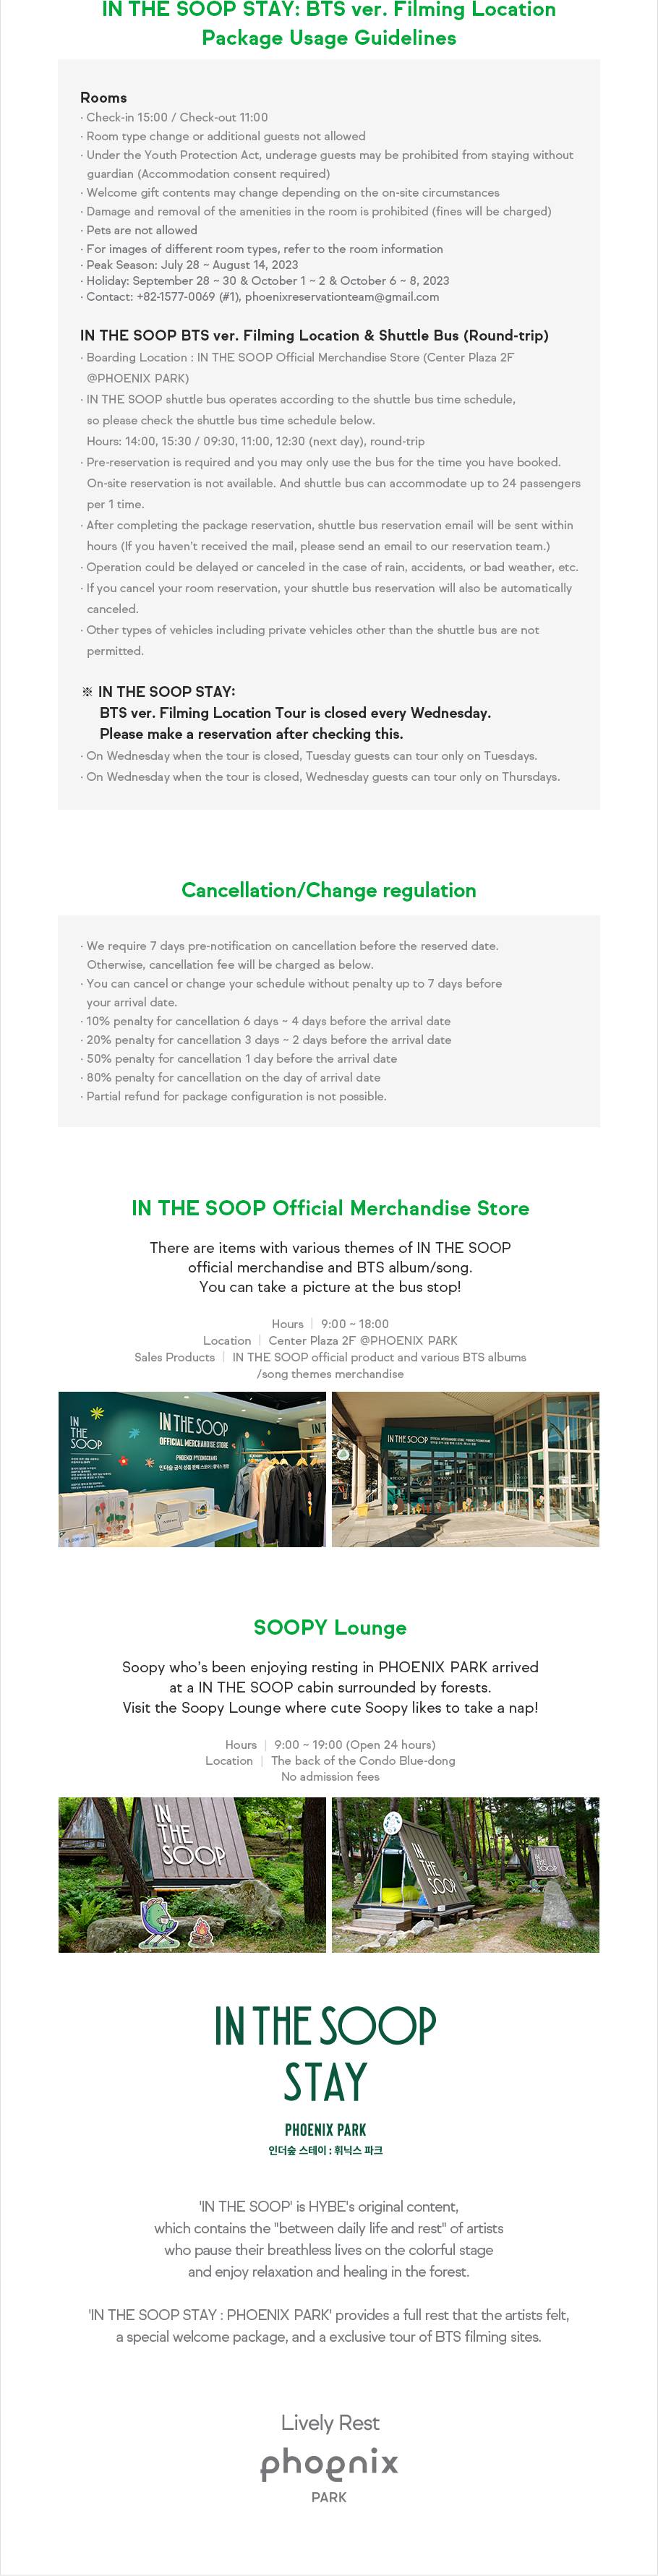 IN THE SOOP STAY: BTS ver. Filming Location Package Usage Guidelines. Rooms: Check-in 15:00/Check-out 11:00. Room type change or additional guests not allowed. Under the Youth Protection Act, nderage guests may be prohibited from staying without guardian(Accommodation consent required). Welcome gift contents may change depending on the on-site circumstances Damage and removal of the amenities in the room is prohibited (fines will be charged). Pets are not allowed For images of different room types, refer to the room information. Peak Season: July 28 ~ August 14, 2023, Holiday: September 28 ~ 30 & October 1 ~ 2 & October 6 ~ 8, 2023. Contact: +82-1577-0069(#1), phoenixreservationteam@gmail.com. IN THE SOOP BTS ver. Filming Location & Shuttle Bus (Round-trip): Boarding Location: IN THE SOOP Official Merchandise Store(Center Plaza 2F @PHOENIX PARK). IN THE SOOP shuttle bus operates according to the shuttle bus time schedule, so please check the shuttle bus time schedule below. Hours: 14:00, 15:30, 09:30(next day), 11:00(next day), 12:30(next day), round-trip. Pre-reservation is required and you may only use the bus for the time you have booked. On-site reservation is not available. And shuttle bus can accommodate up to 24 passengers per 1 time. After completing the package reservation, shuttle bus reservation email will be sent within hours(If you haven’t received the mail, please send an email to our reservation team). Operation could be delayed or canceled in the case of rain, accidents, or bad weather, etc. If you cancel your room reservation, your shuttle bus reservation will also be automatically canceled. Other types of vehicles including private vehicles other than the shuttle bus are not permitted. IN THE SOOP STAY: BTS ver. Filming Location Tour is closed every Wednesday. Please make a reservation after checking this. On Wednesday when the tour is closed, Tuesday guests can tour only on Tuesdays. On Wednesday when the tour is closed, Wednesday guests can tour only on Thursdays. Cancellation/Change regulation. We require 7 days pre-notification on cancellation before the reserved date. Otherwise, cancellation fee will be charged as below. You can cancel or change your schedule without penalty up to 7 days before your arrival date. 10% penalty for cancellation 6 days ~ 4 days before the arrival date. 20% penalty for cancellation 3 days ~ 2 days before the arrival date. 50% penalty for cancellation 1 day before the arrival date. 80% penalty for cancellation on the day of arrival date. Partial refund for package configuration is not possible. IN THE SOOP Official Merchandise Store. There are items with various themes of IN THE SOOP official merchandise and BTS album/song. You can take a picture at the bus stop! Hours: 9:00 ~ 18:00, Location: Center Plaza 2F @PHOENIX PARK, Sales Products: IN THE SOOP official product and various BTS albums/song themes merchandise. SOOPY Lounge. Soopy who’s been enjoying resting in Phoenix Park arrived at a IN THE SOOP cabin surrounded by forests. Visit the Soopy Lounge where cute Soopy likes to take a nap! Hours: 9:00 ~ 19:00(Open 24 hours), Location: The back of the Condo Blue-dong No admission fees. IN THE SOOP STAY PHOENIX PARK 인더숲 스테이: 휘닉스 파크, 'IN THE SOOP' is HYBE's original content, which contains the 'between daily life and rest' of artists who pause their breathless lives on the colorful stage and enjoy relaxation and healing in the forest. 'IN THE SOOP STAY : Phoenix park' provides a full rest that the artists felt, a special welcome package, and a exclusive tour of BTS filming sites. Lively Rest, PHOENIX PARK